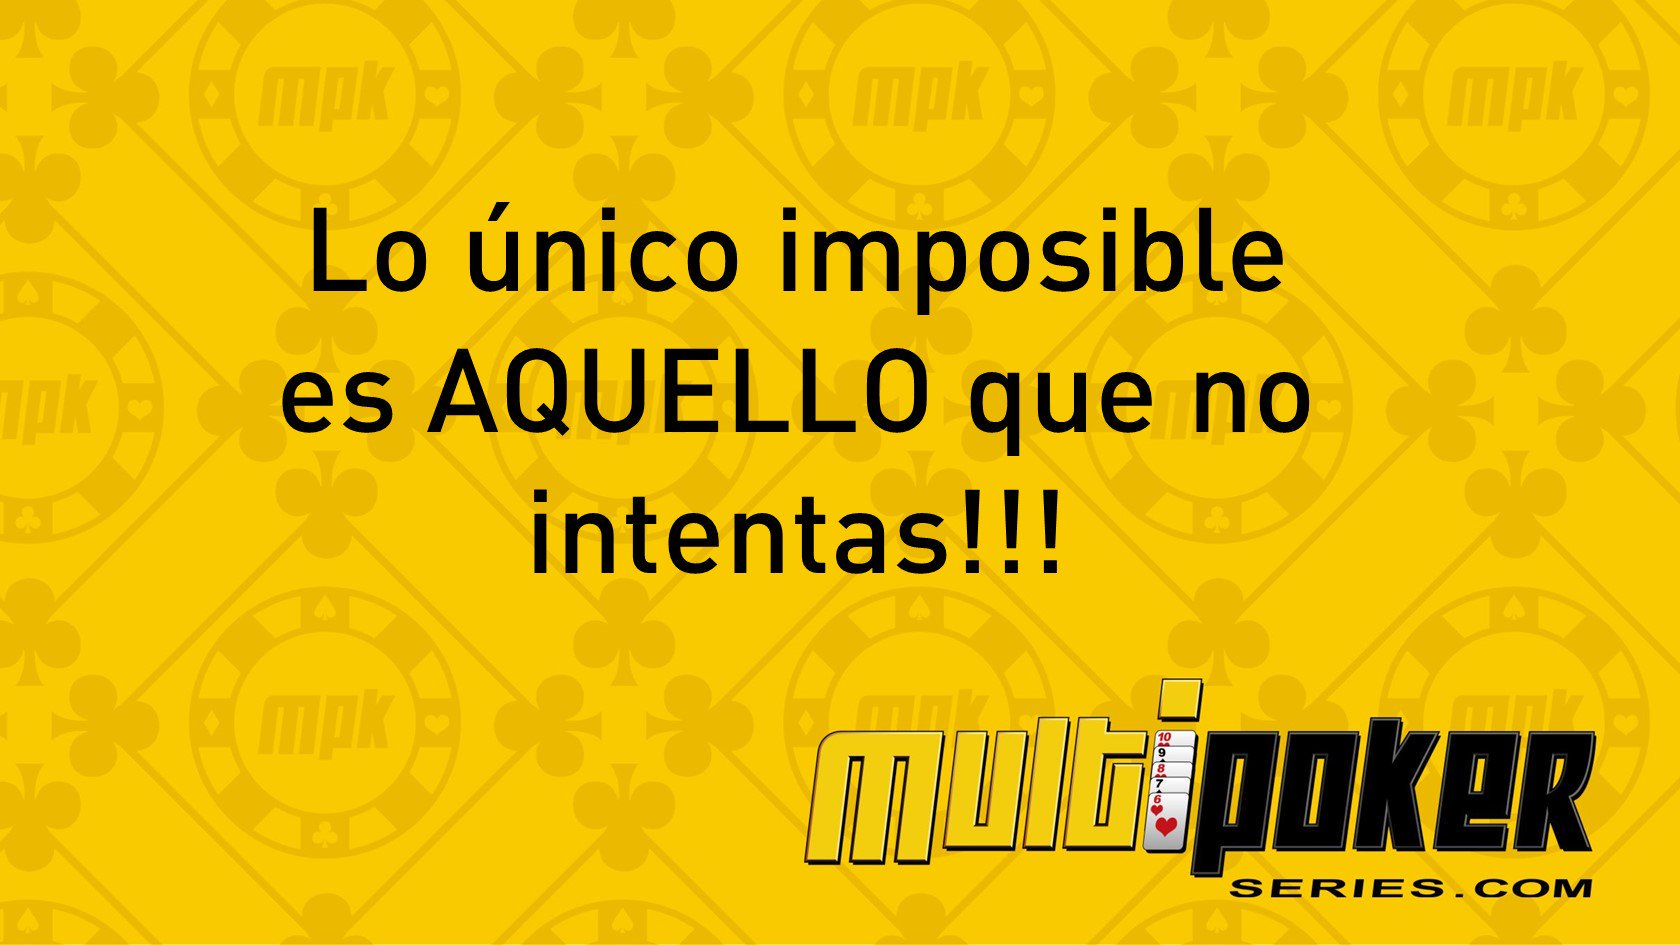 lo-imposible